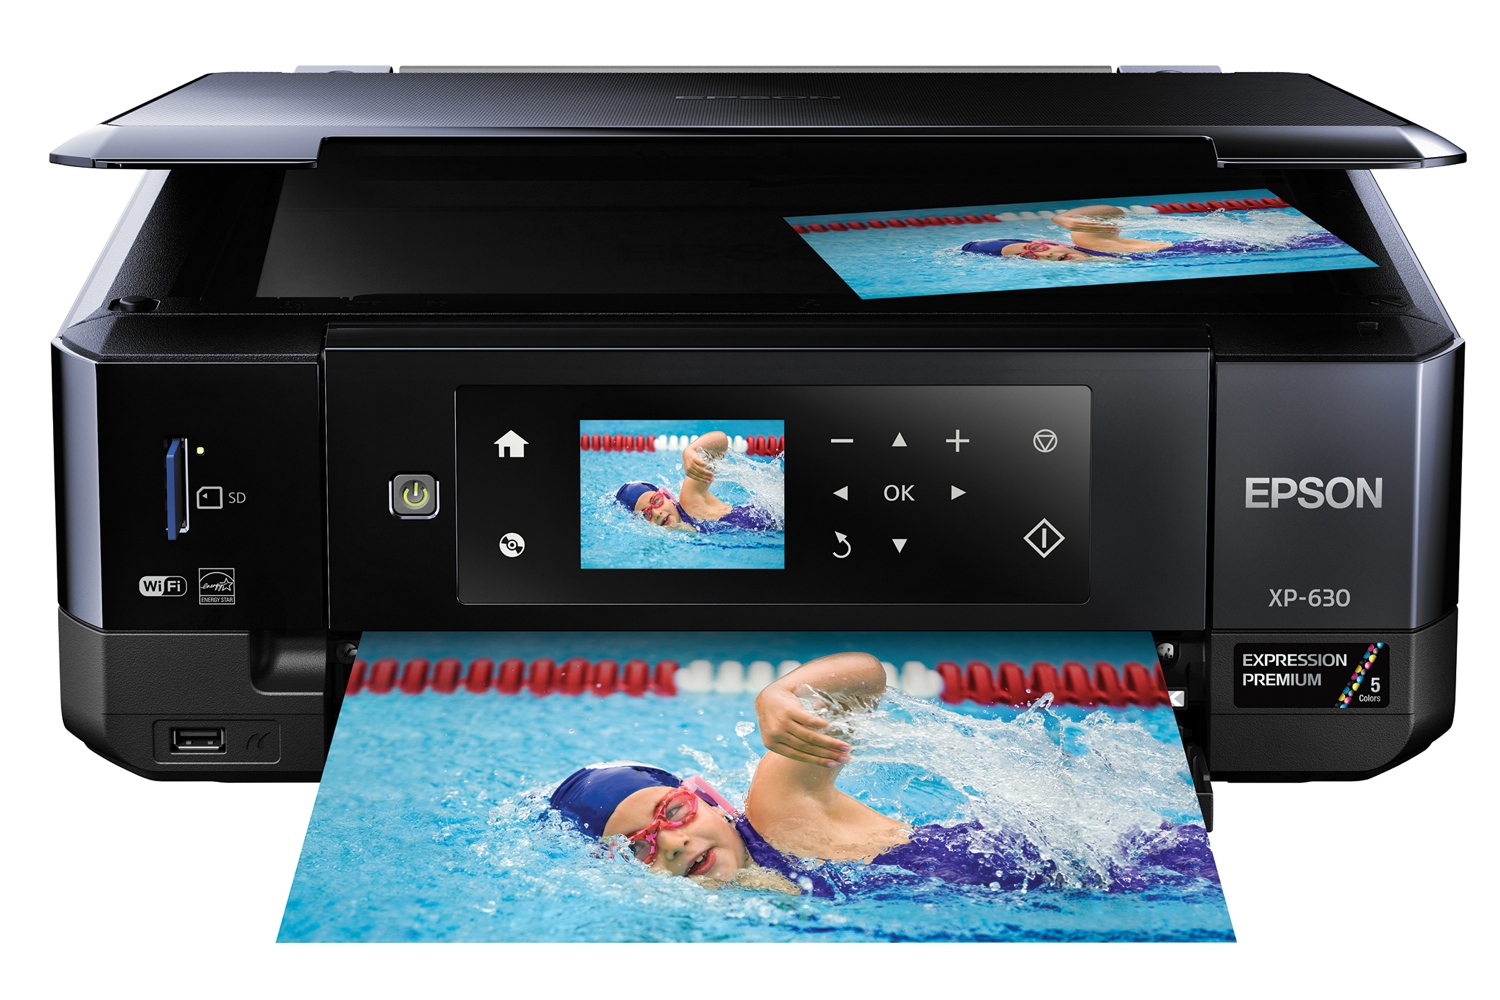 epsons updated expression home photo printers include wide format model epson xp 630 front view